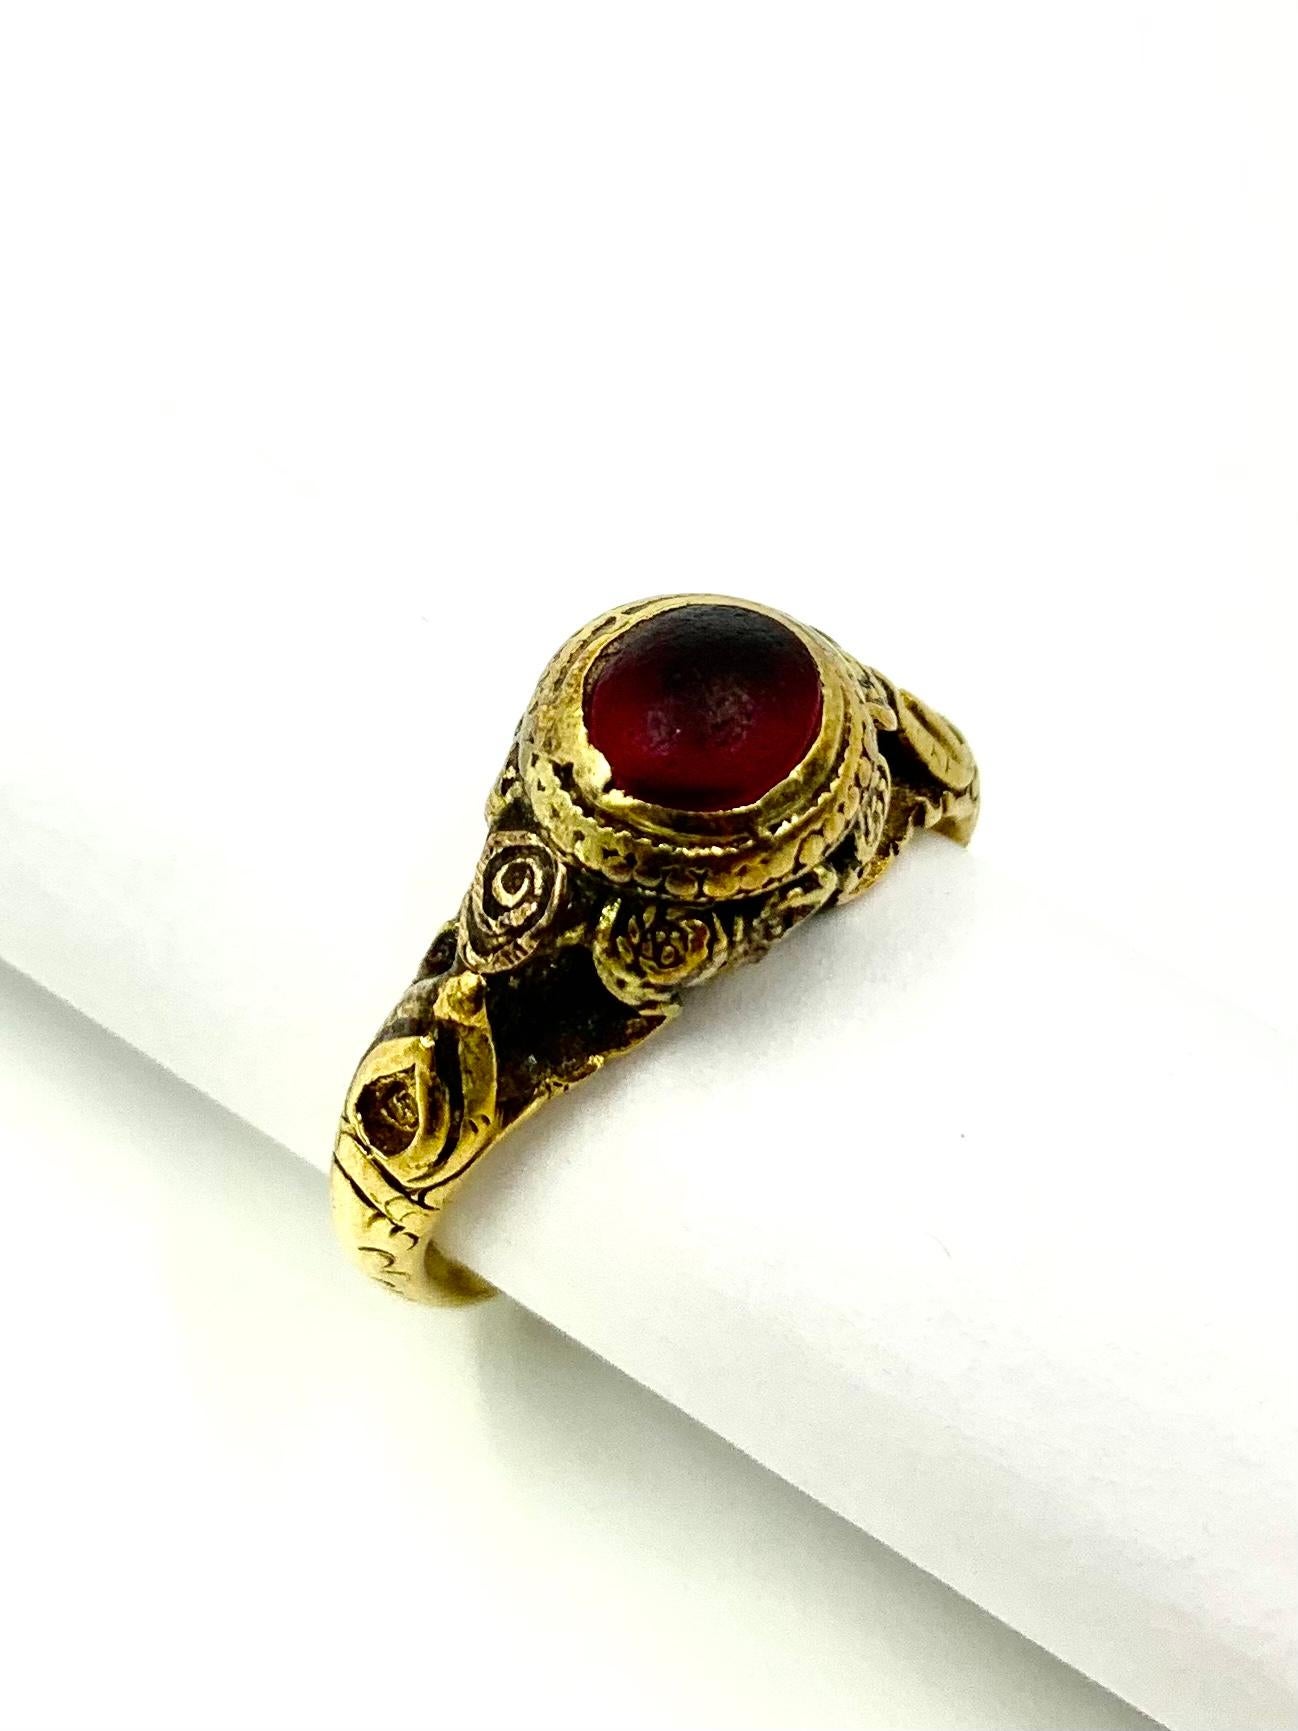 Ancient Byzantine High Carat Gold Cabochon Garnet Amulet Ring with Hidden Cross For Sale 9